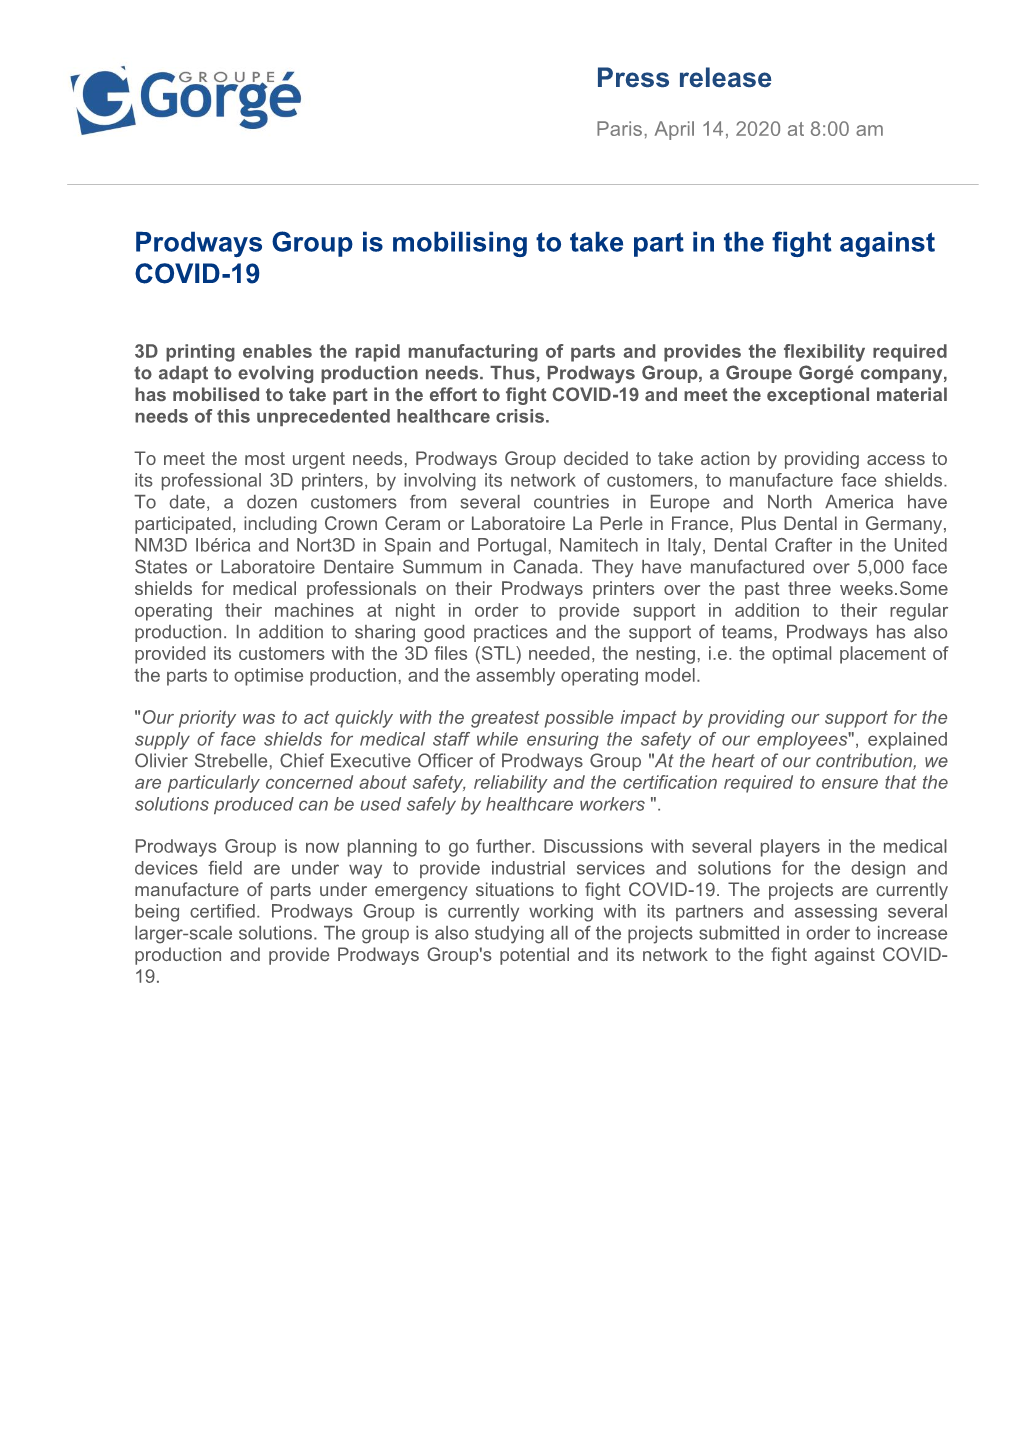 Press Release Prodways Group Is Mobilising to Take Part in the Fight Against COVID-19